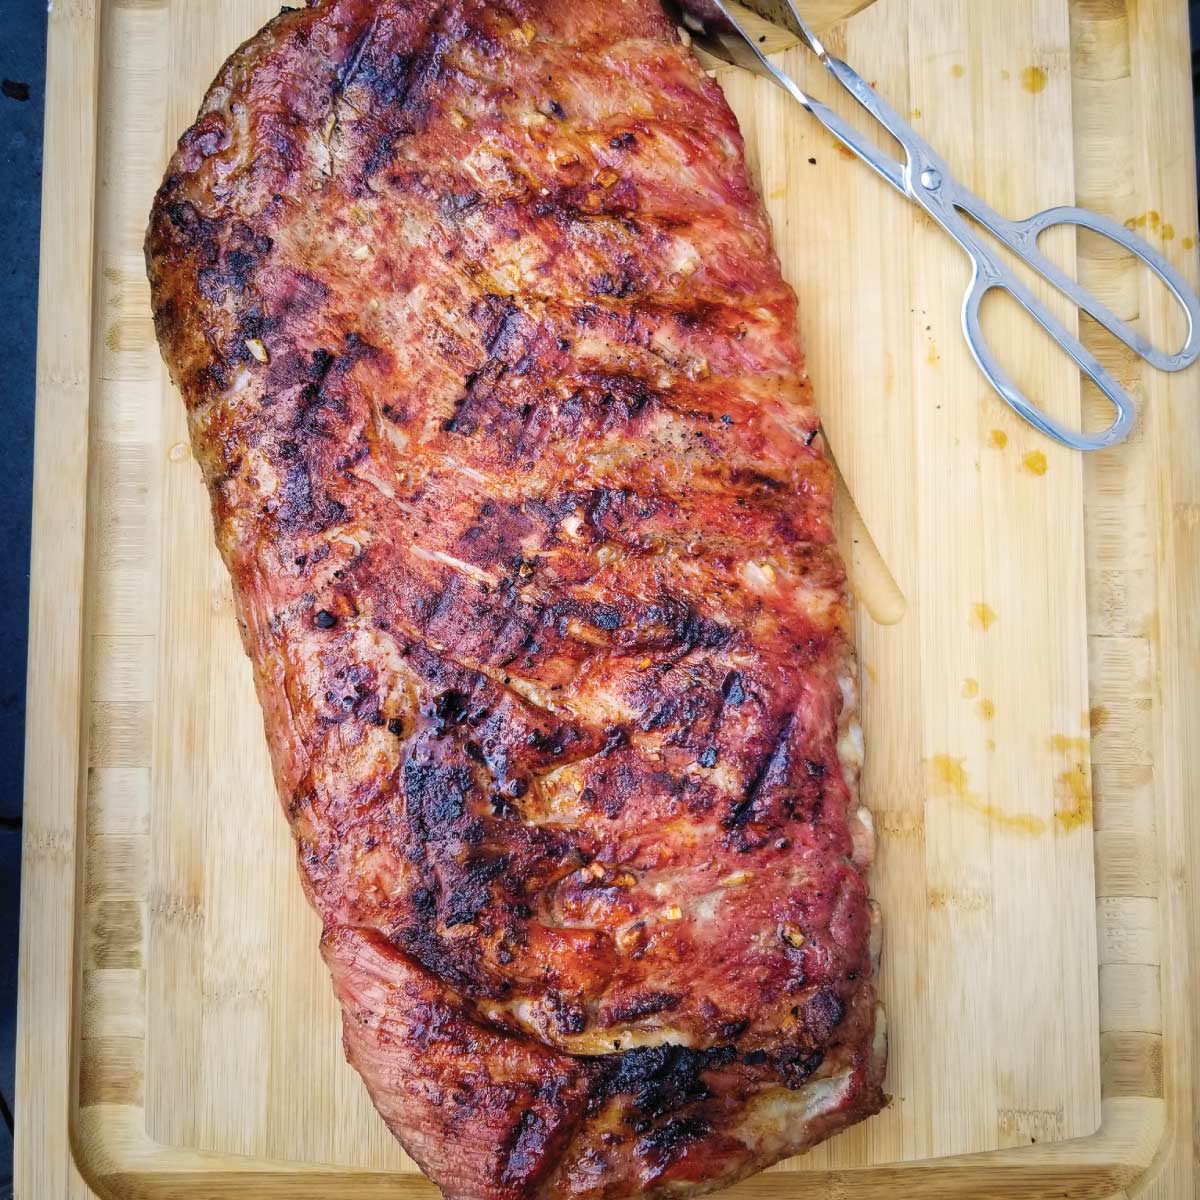 Rack of St Louis ribs resting on a cutting board after cooking.